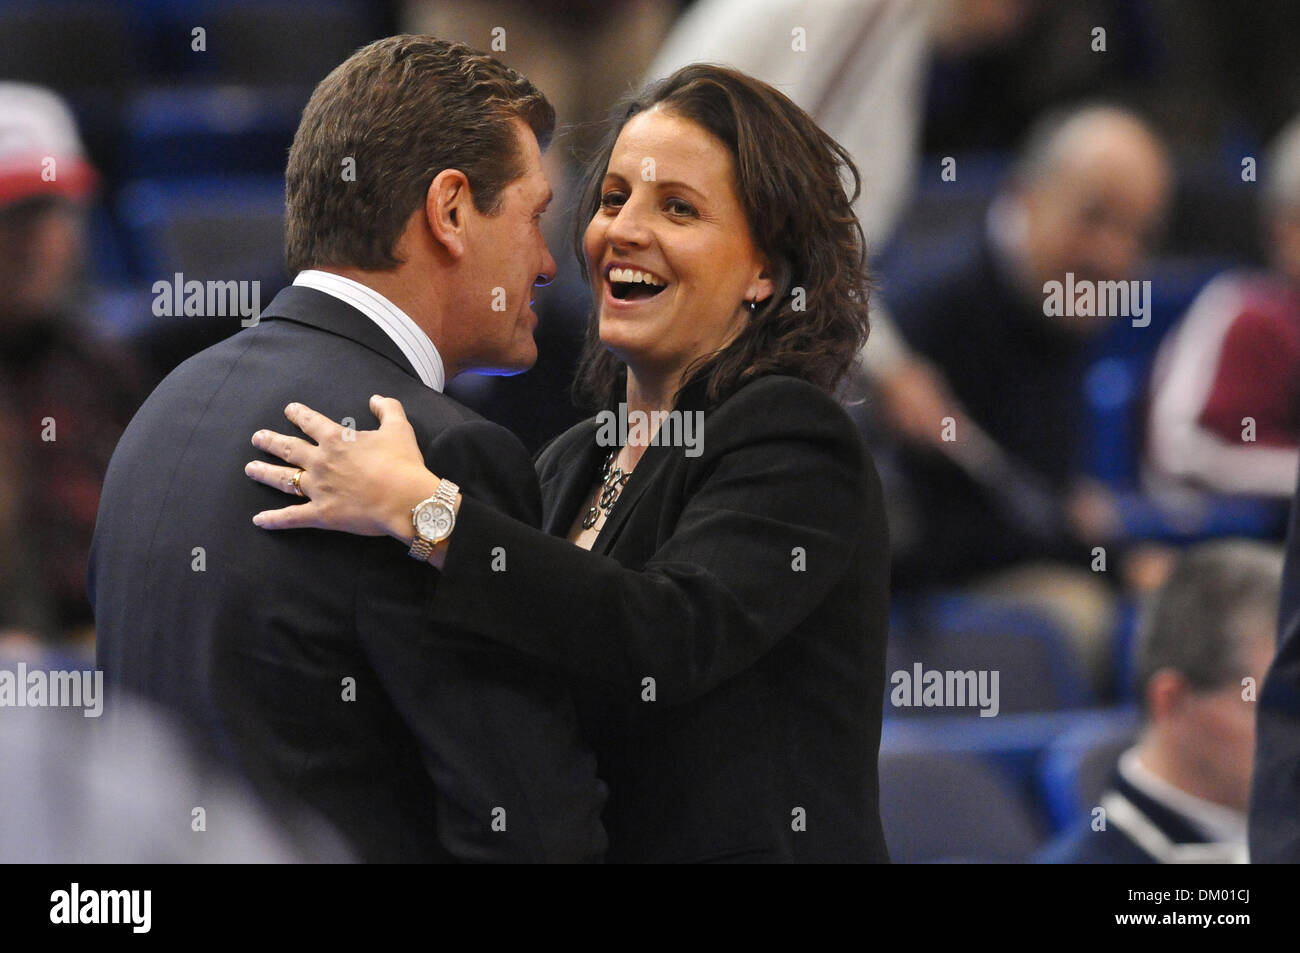 Dec. 10, 2009 - Hartford, Connecticut, U.S - 10 December 2009: Connecticut Head Coach Geno Auriemma and Hartford Head Coach Jennifer Rizzotti hug after the game. Rizzotti played for Auriemma's Huskies in the mid 90's. Connecticut defeated Hartford 80 - 45 held at XL Center in Hartford, Connecticut. (Credit Image: © Geoff Bolte/Southcreek Global/ZUMApress.com) Stock Photo